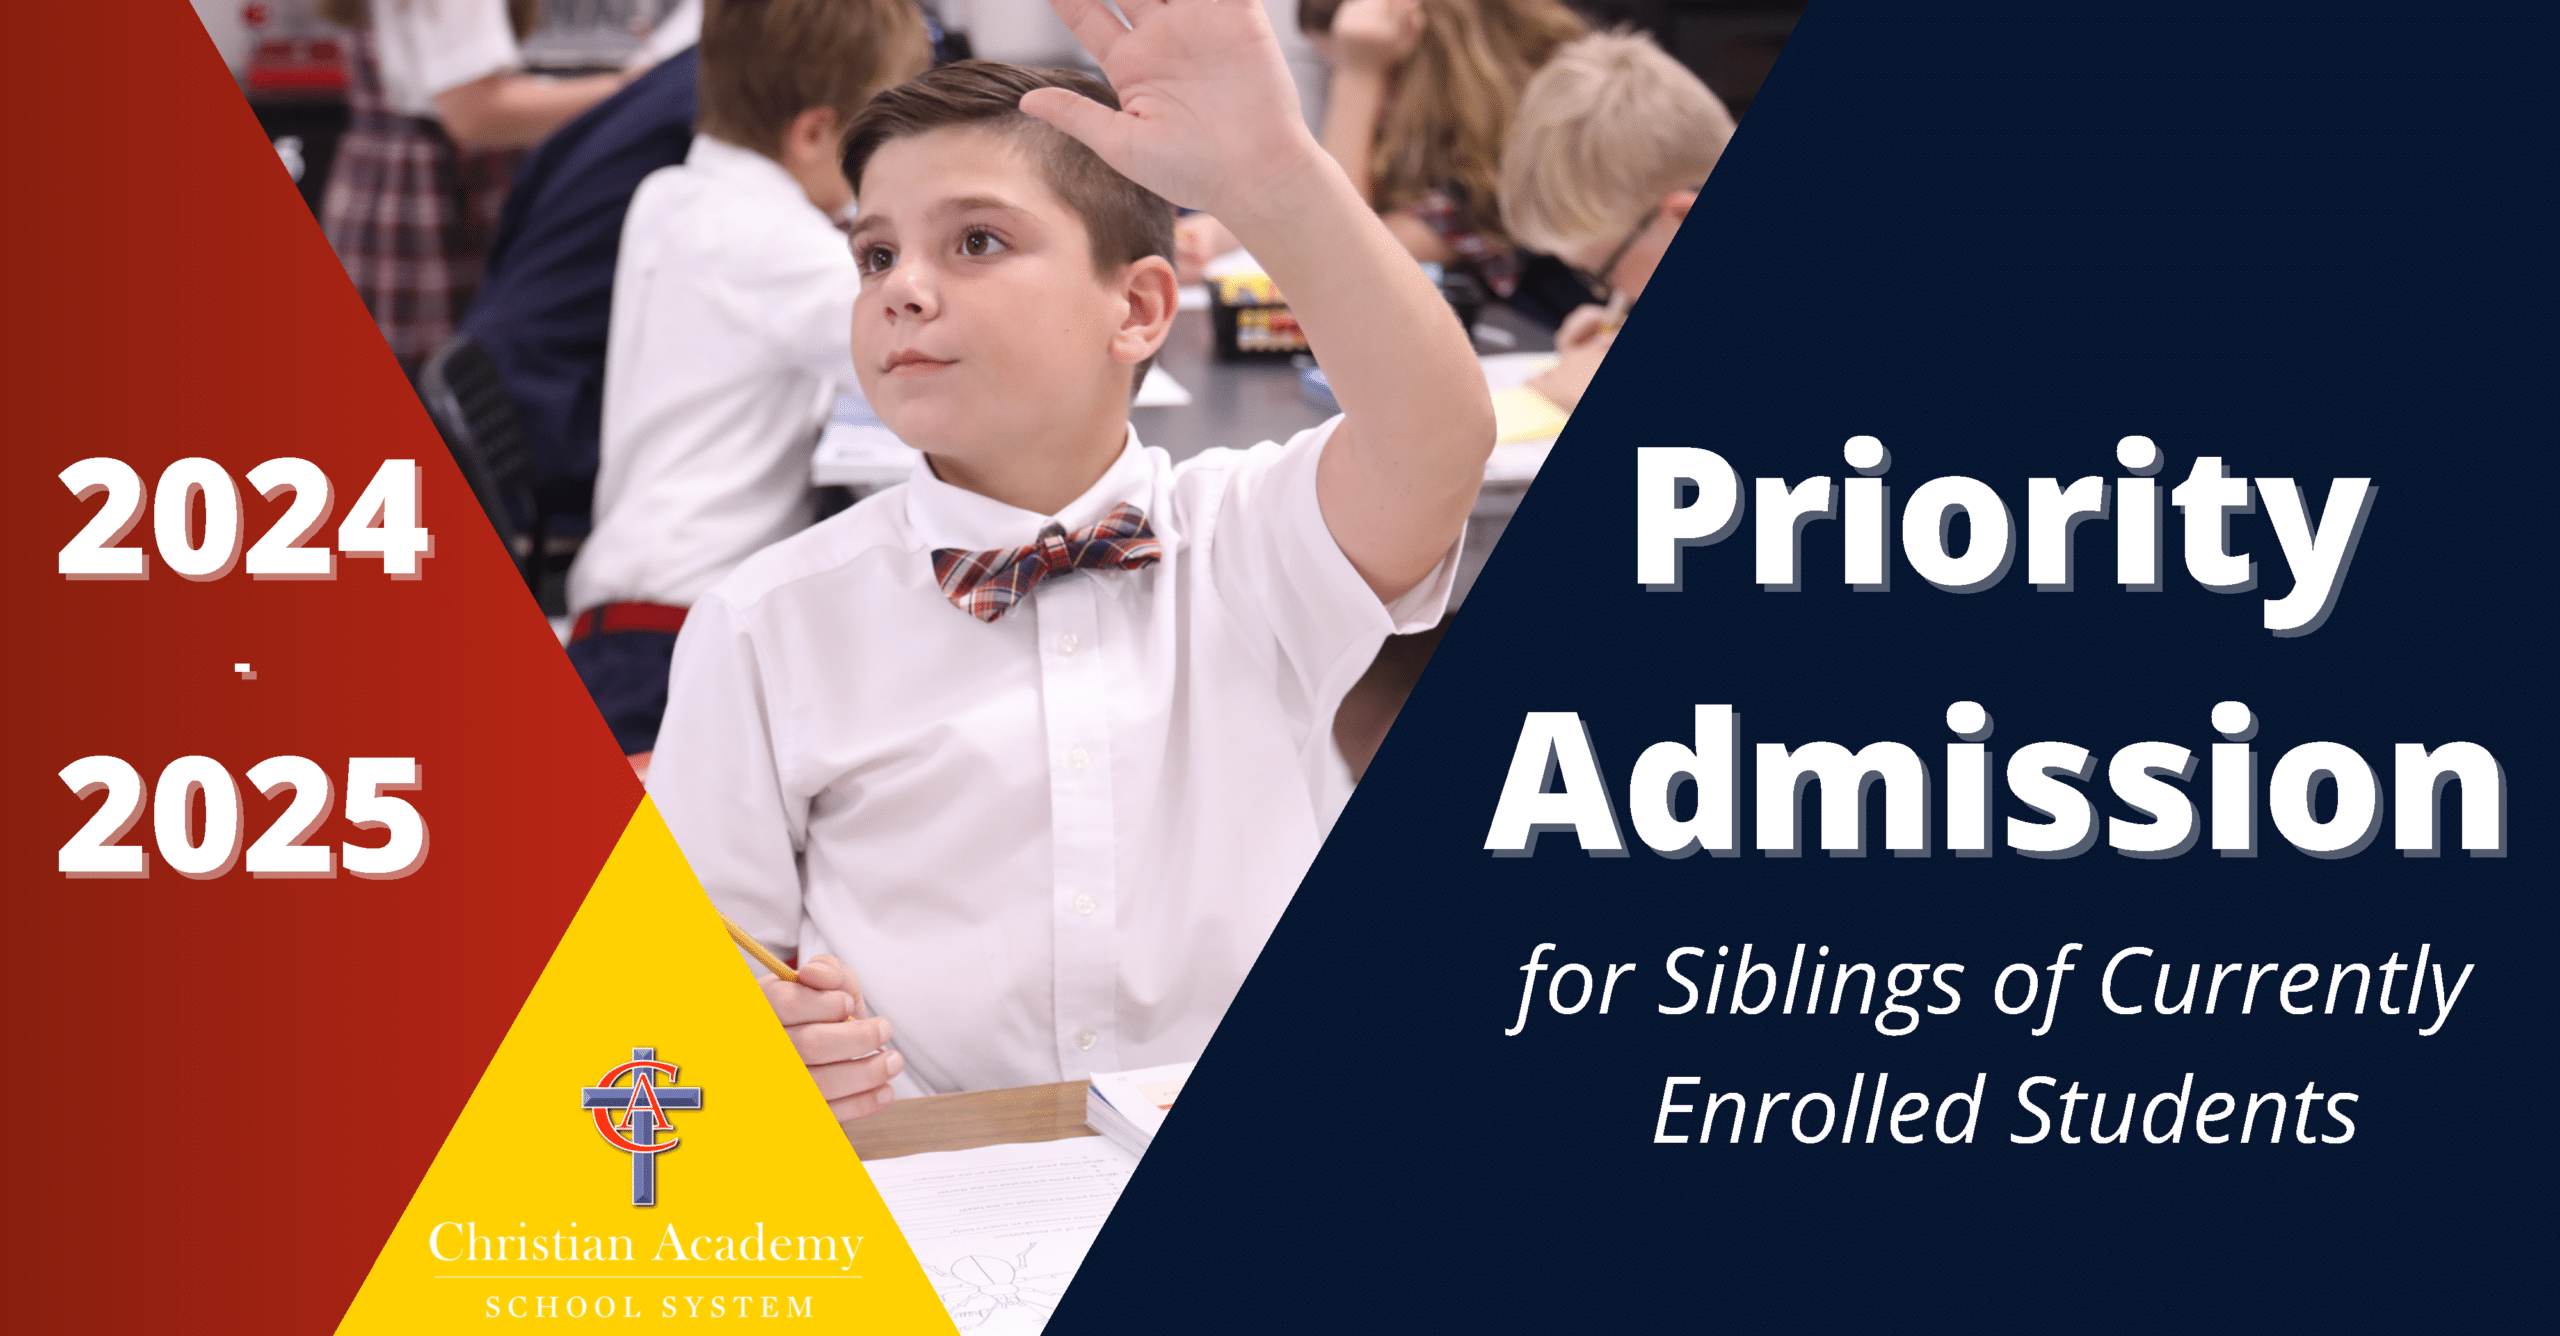 Christian Academy School System | Priority Admission for Siblings | 2024-2025 School Year